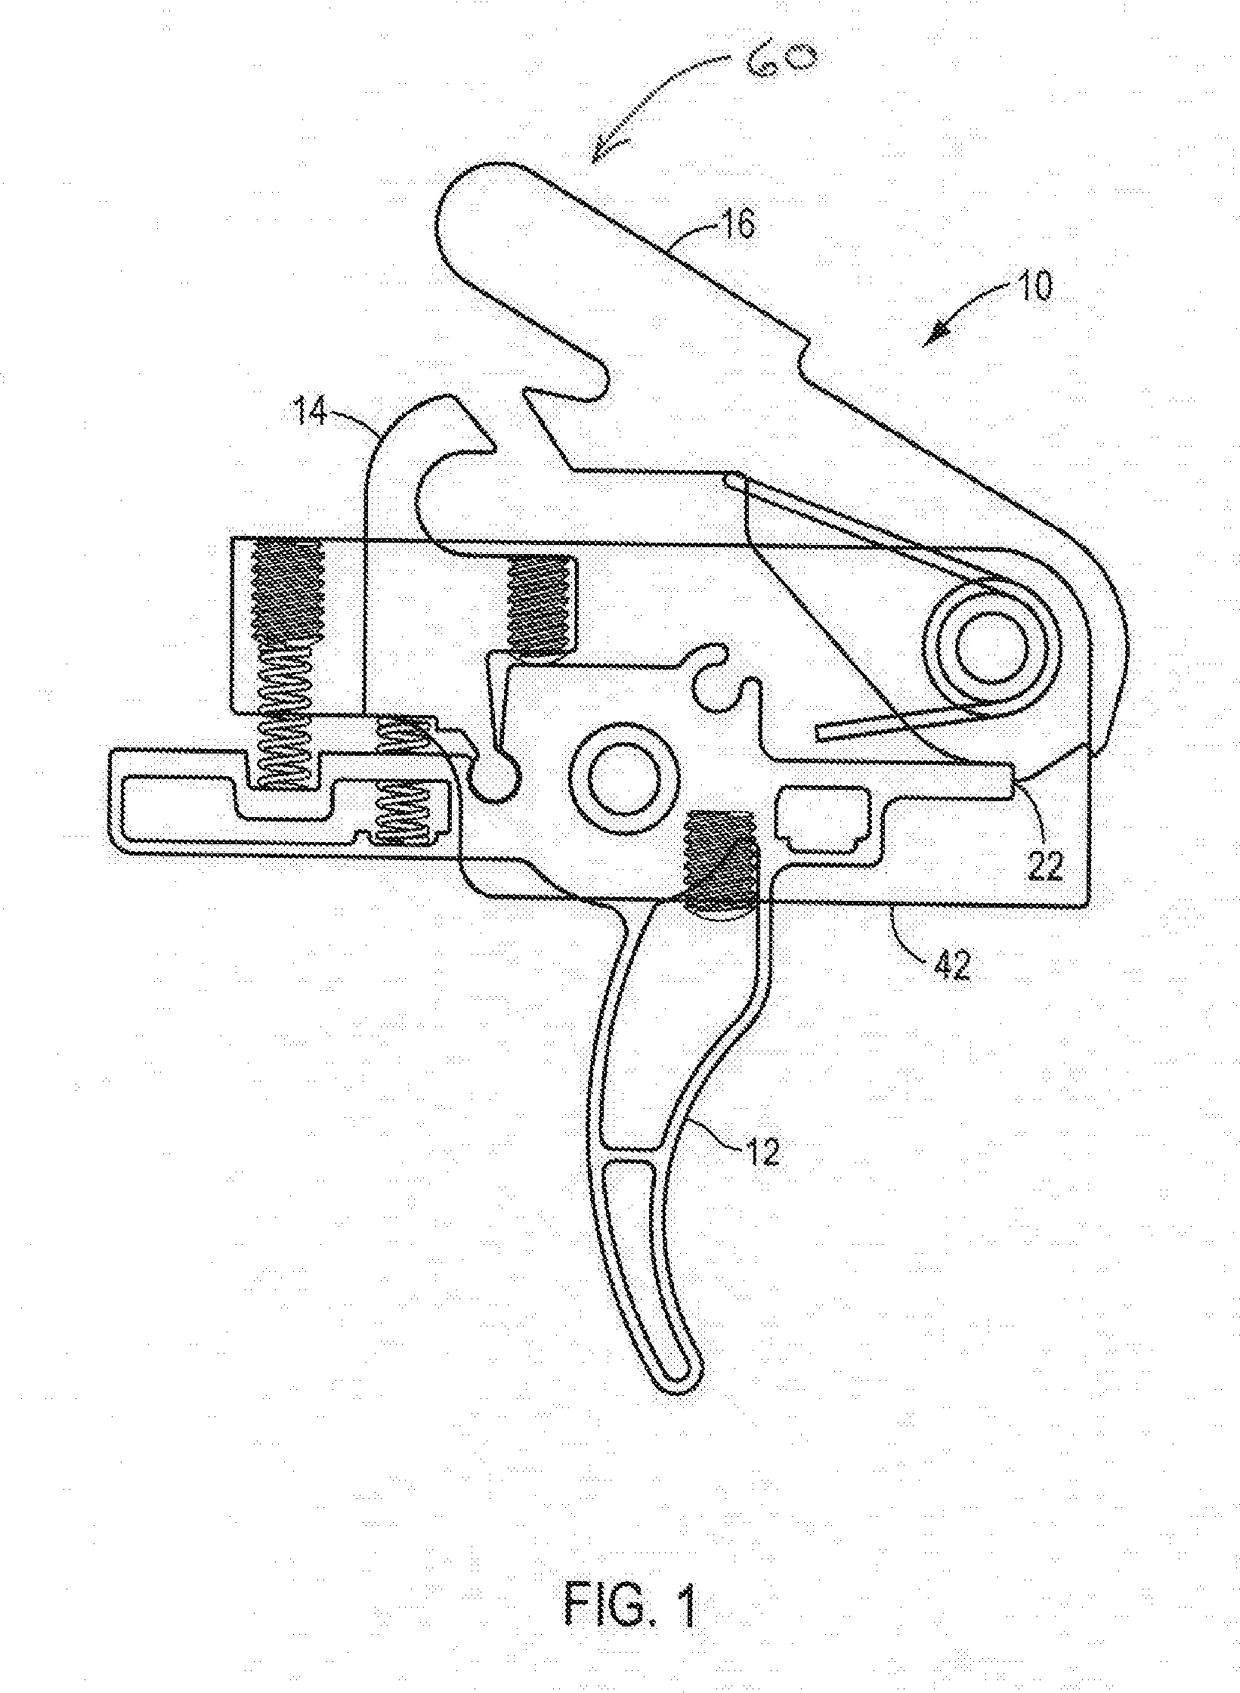 Trigger Assembly with Modifications